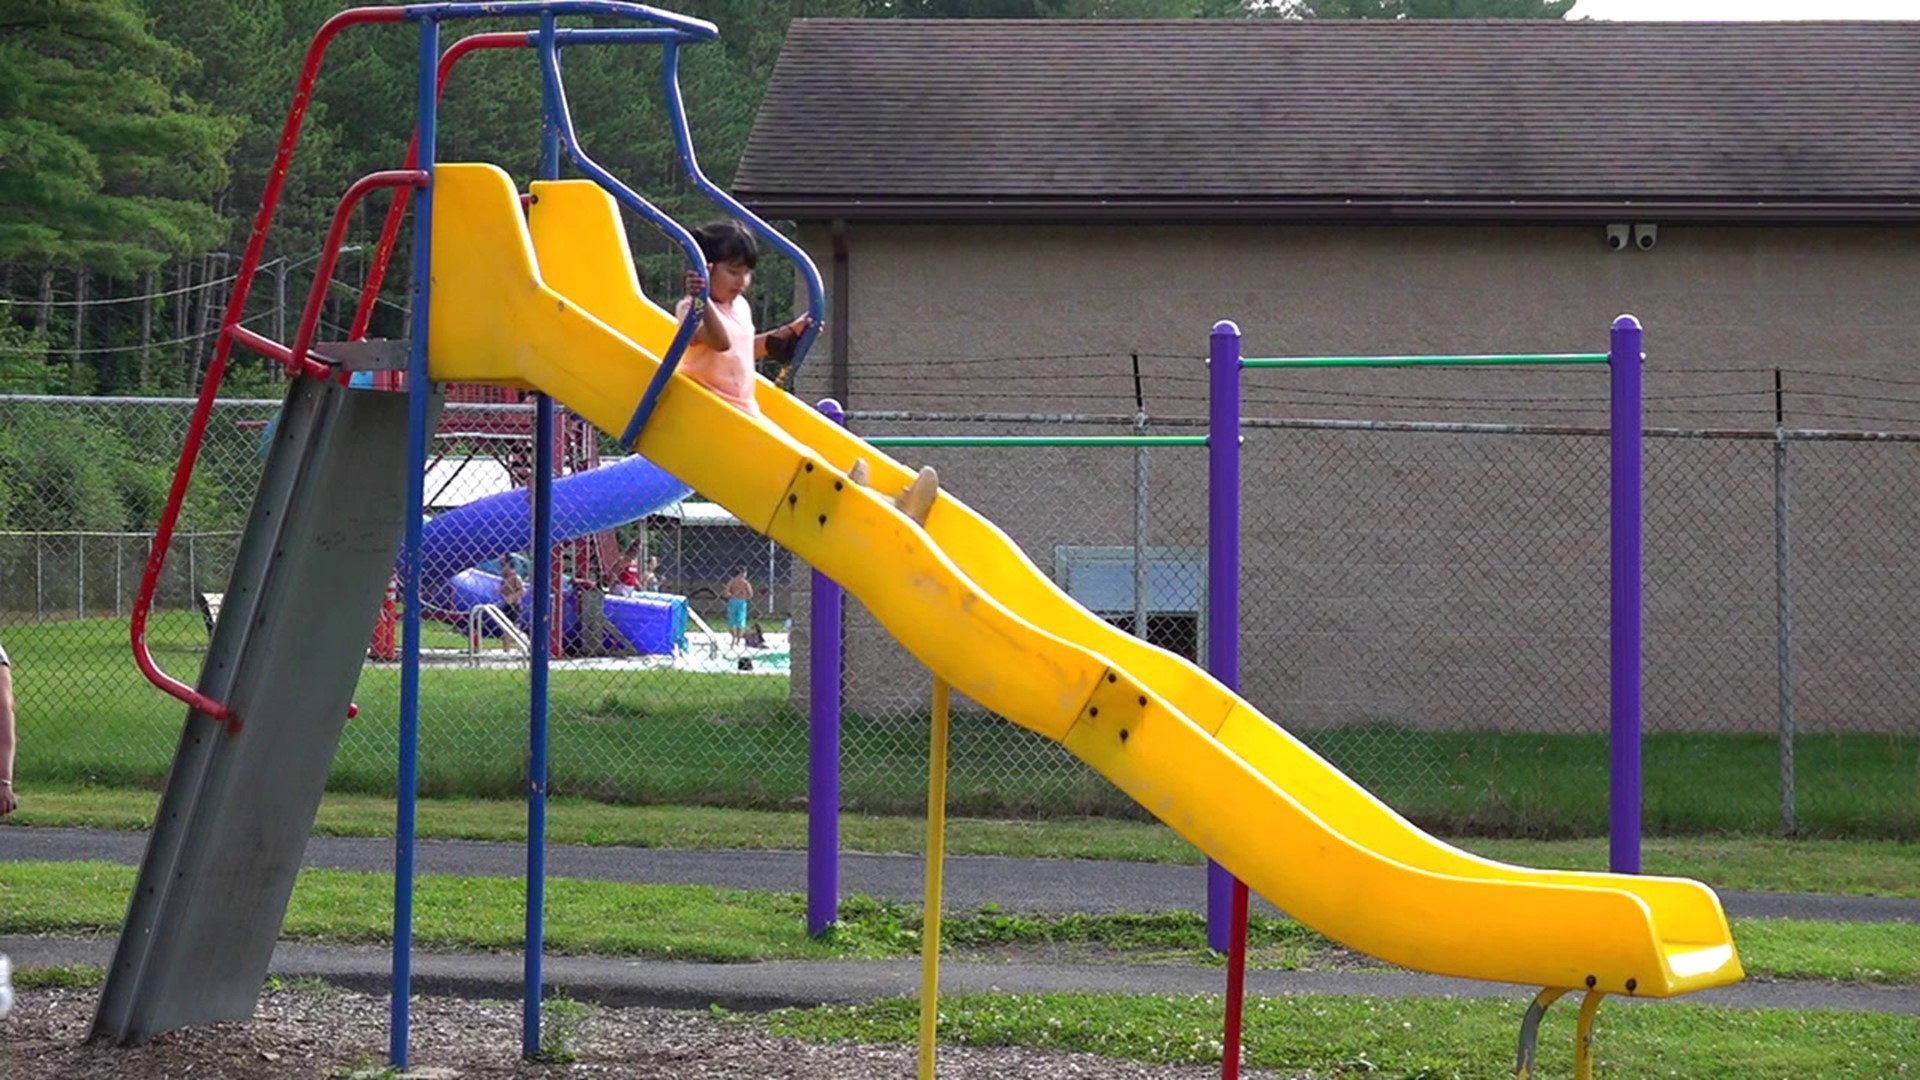 Schuylkill County is getting its first all-inclusive playground as construction continues in Minersville.